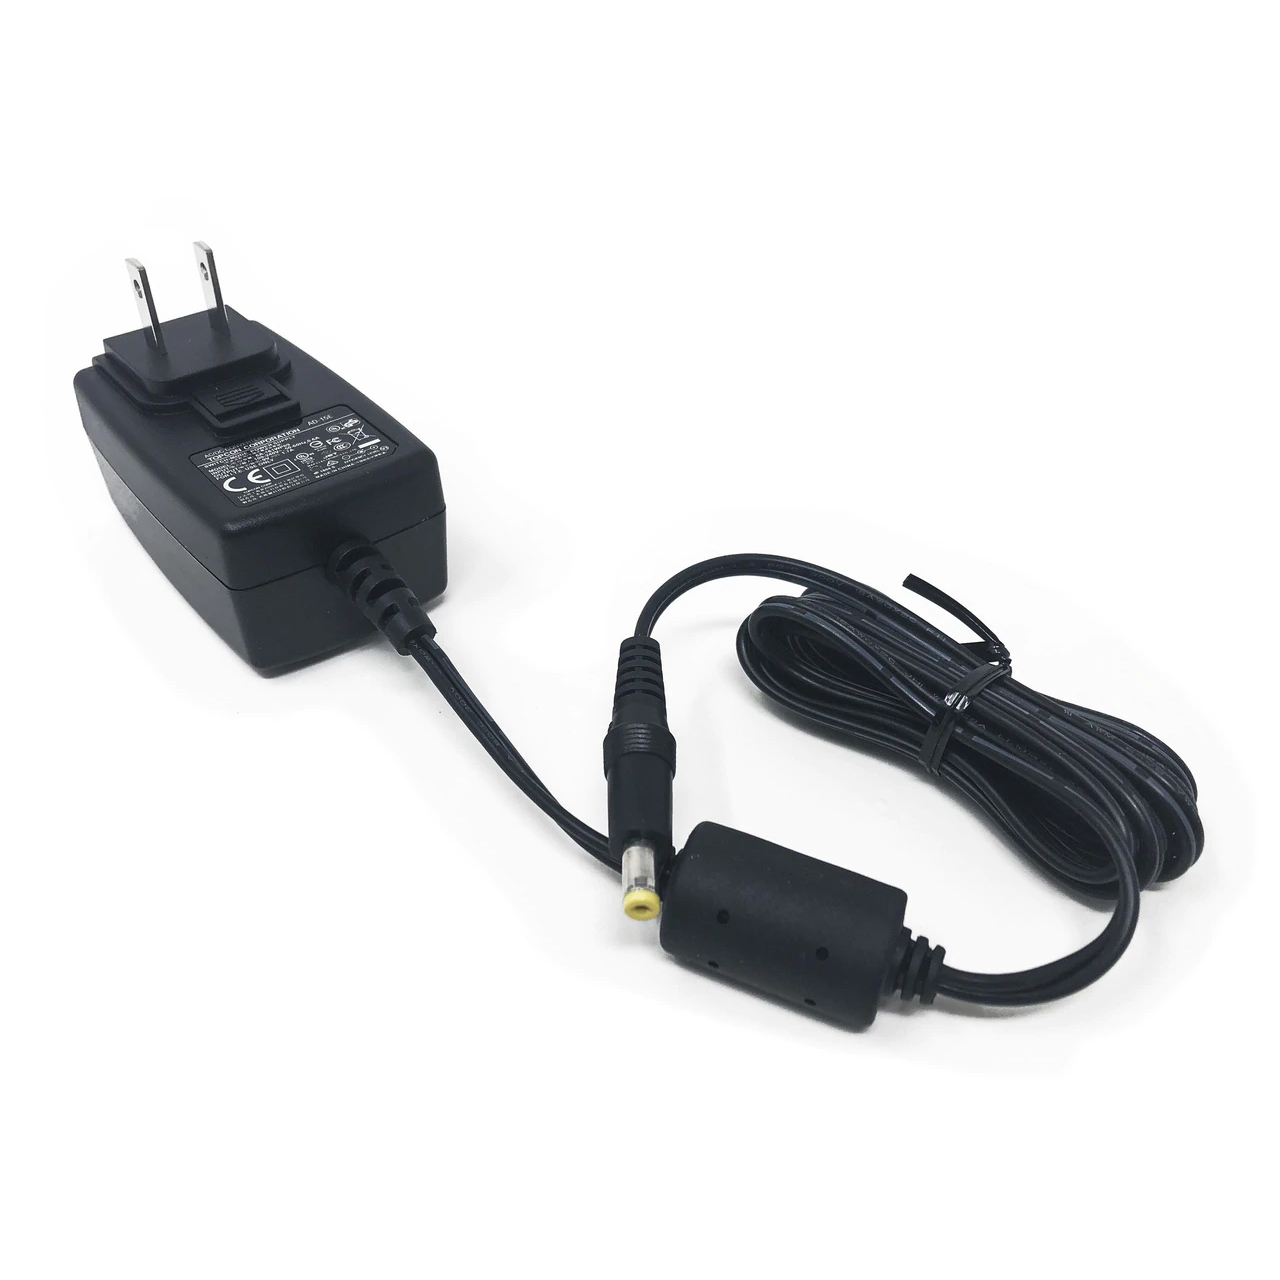 Topcon Charger for RL-H5 Series (1024944-02)